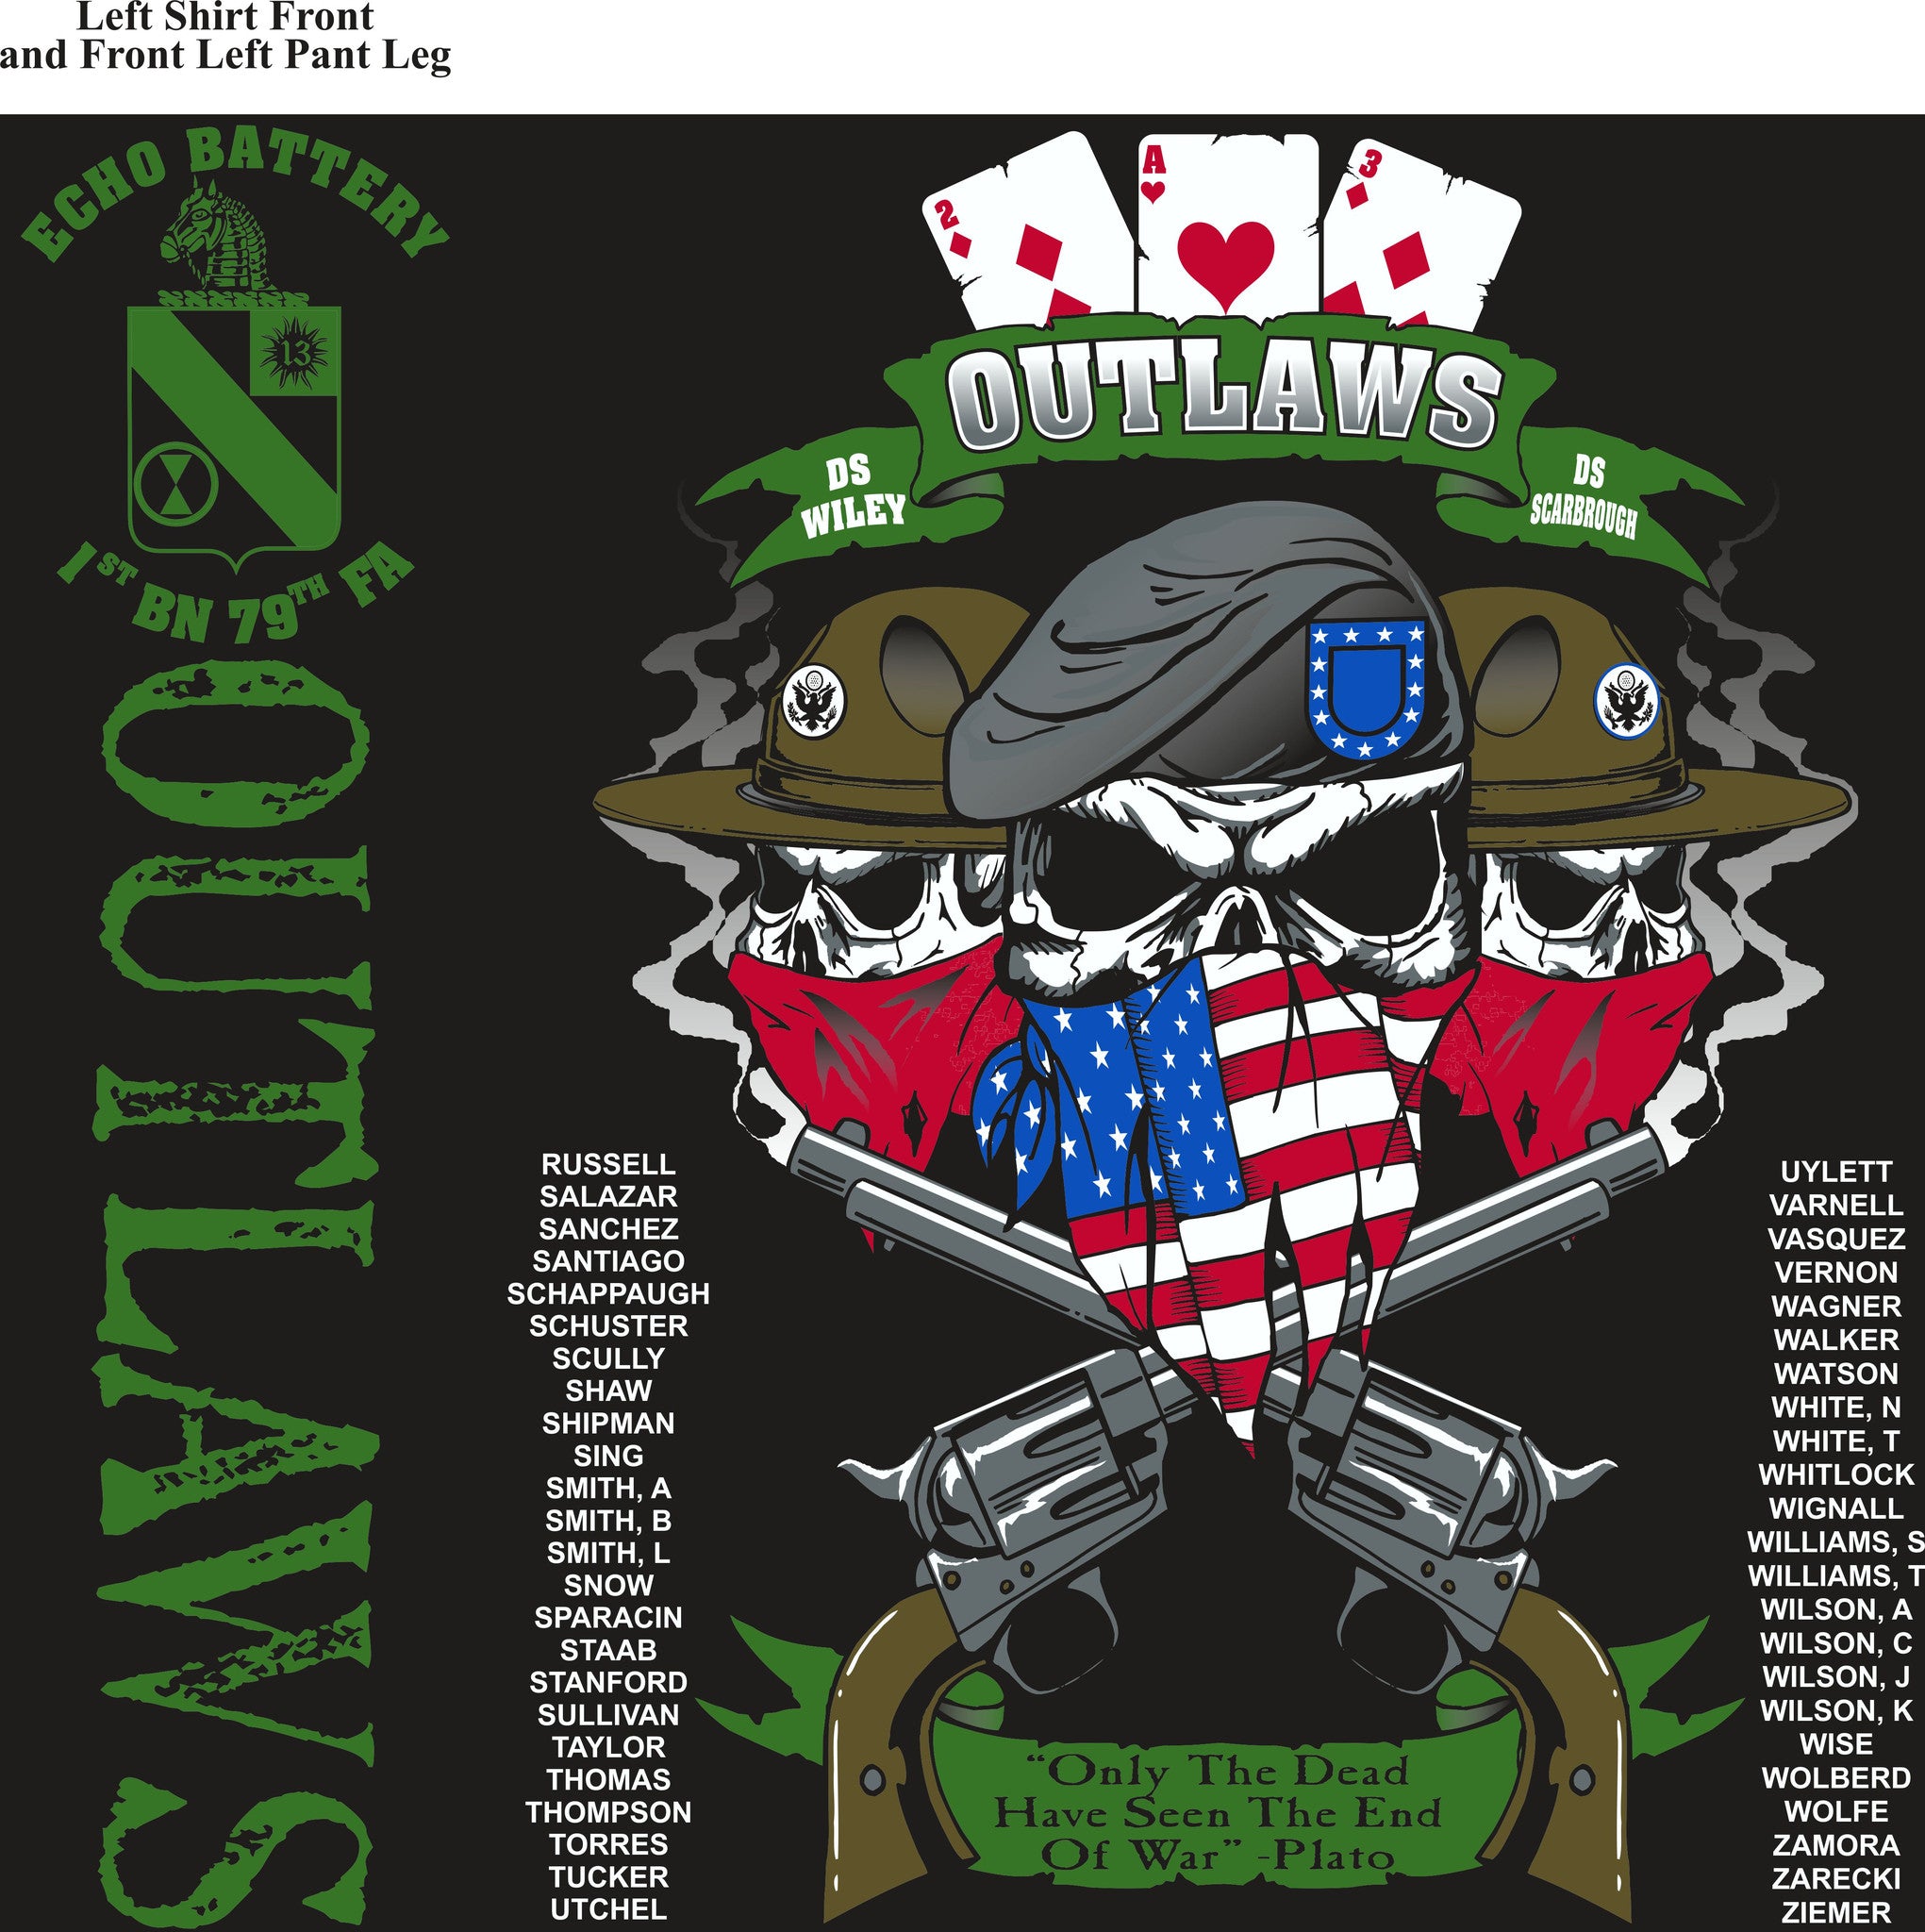 PLATOON SHIRTS (2nd generation print) ECHO 1st 79th OUTLAWS AUG 2016